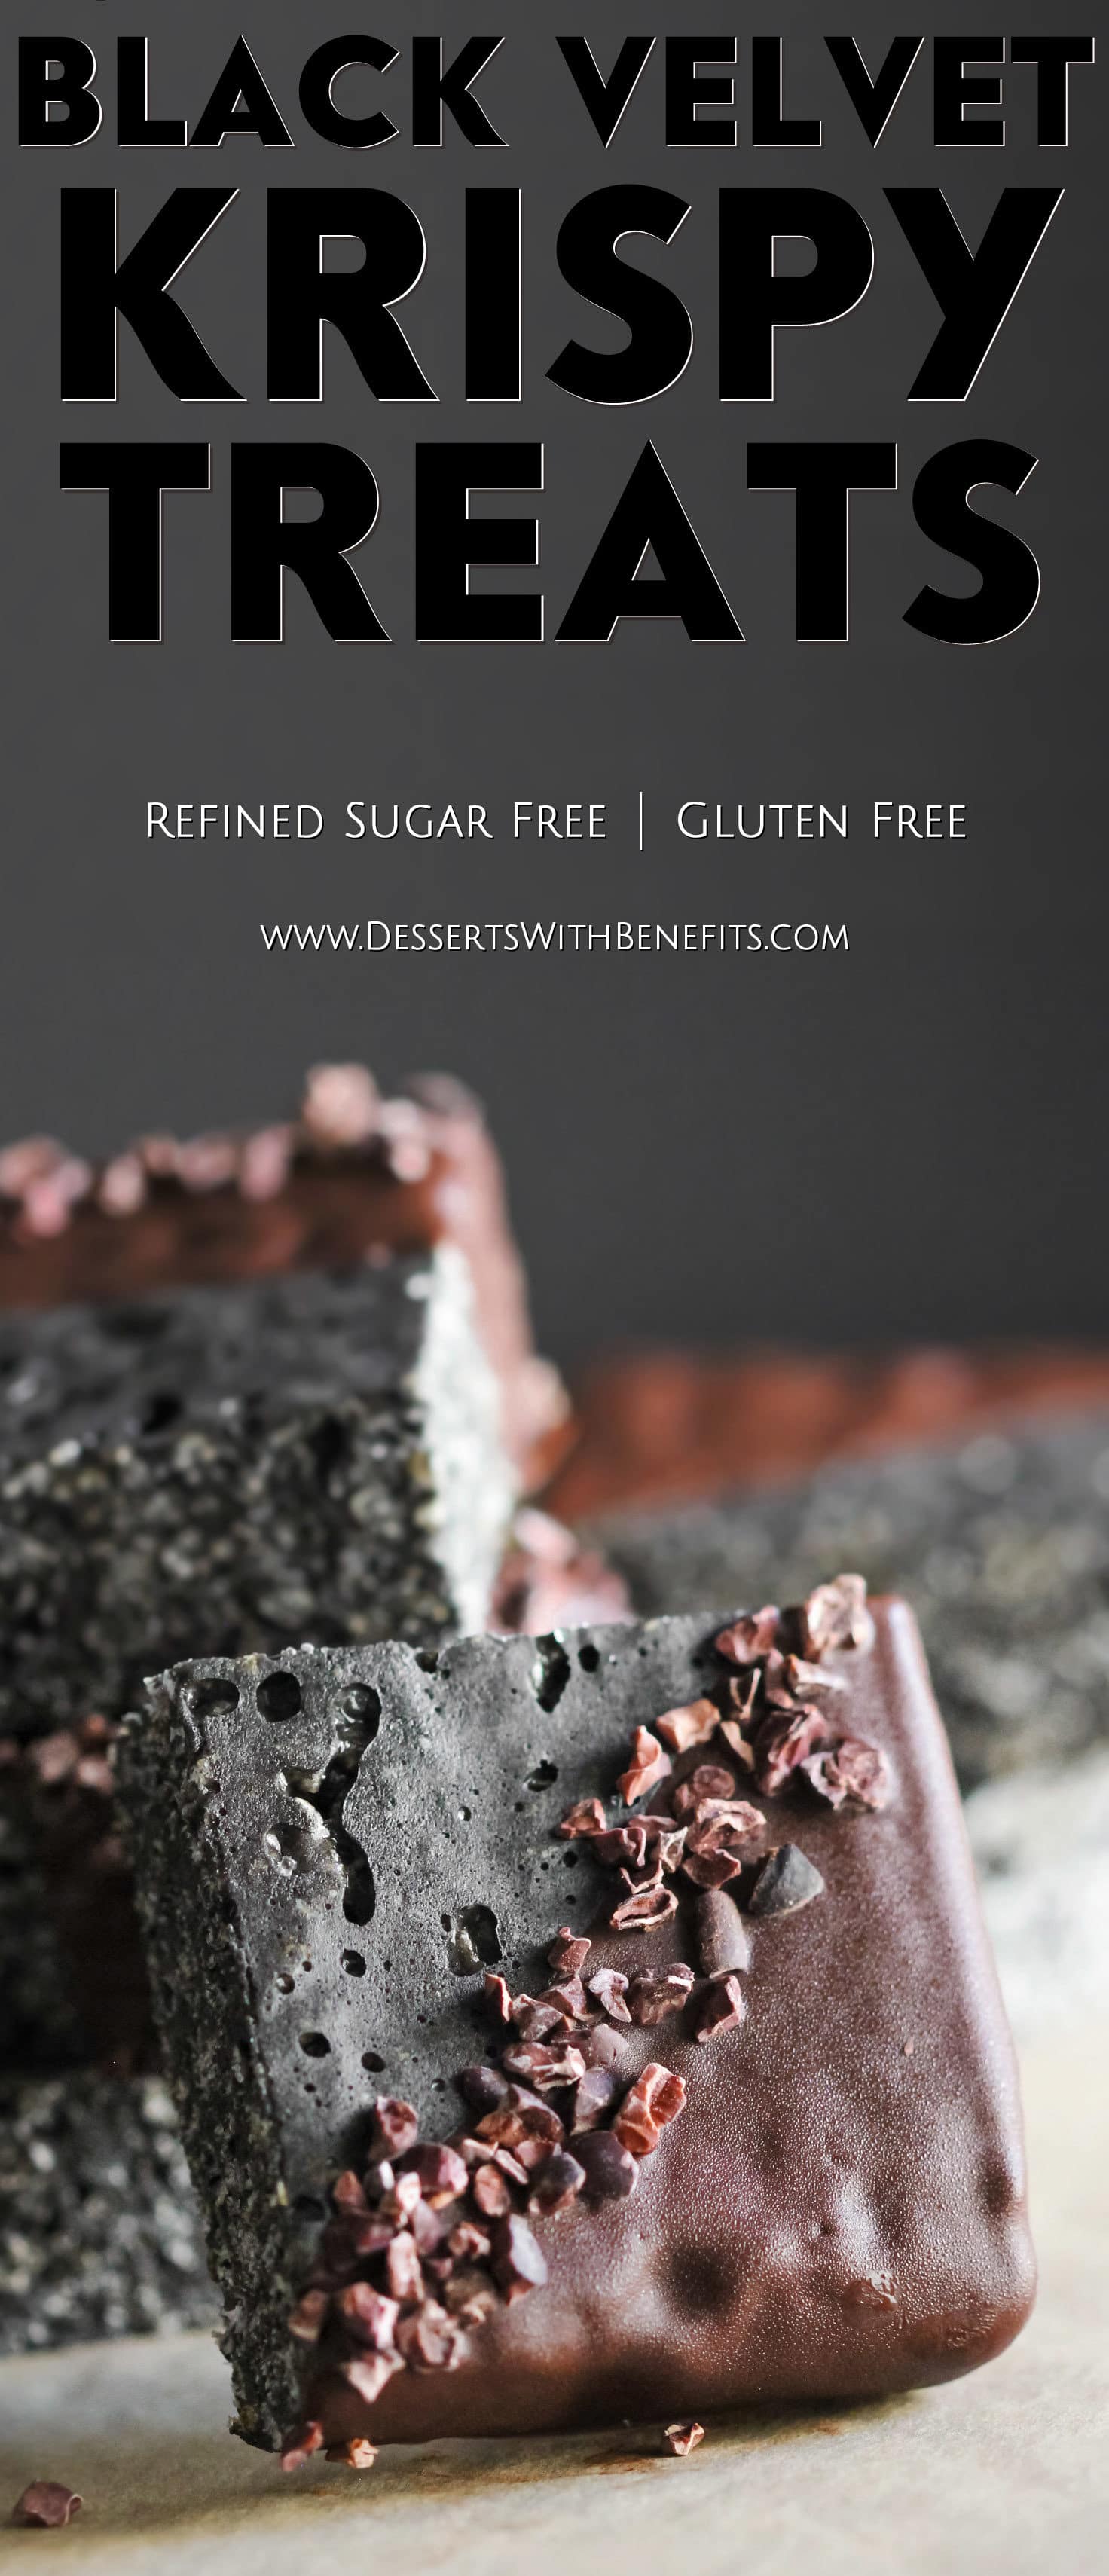 I bet you've never seen Krispy Treats like THESE before! These Healthy Black Velvet Krispy Treats are chewy, crunchy, sweet, and chocolatey. Flavored like your classic red velvet dessert with both vanilla and a hint of chocolate... only this one is black instead of red! Healthy Dessert Recipes at the Desserts With Benefits Blog